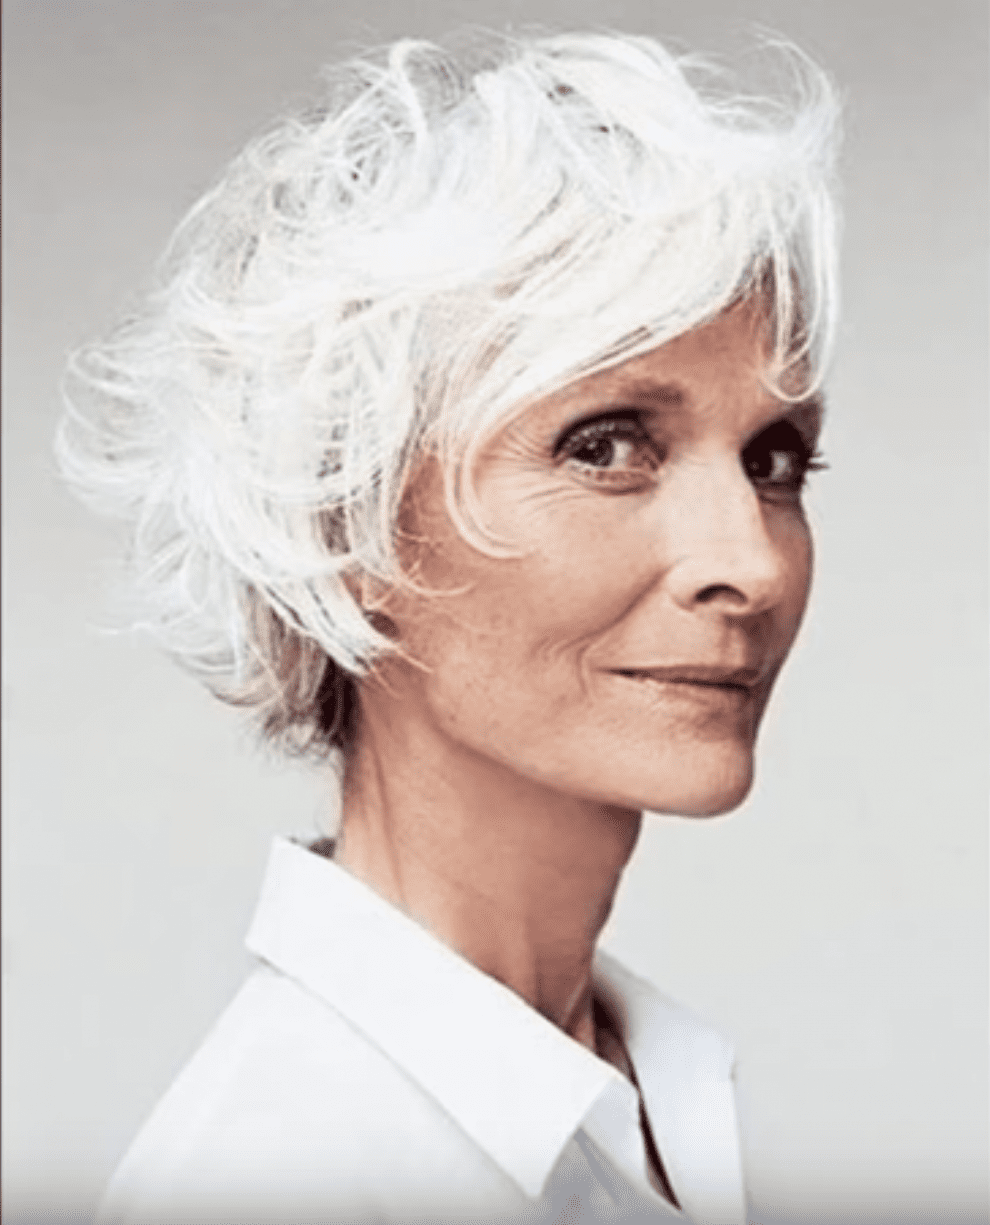 Hairstyles for older women - Haircuts that look amazing on mature women